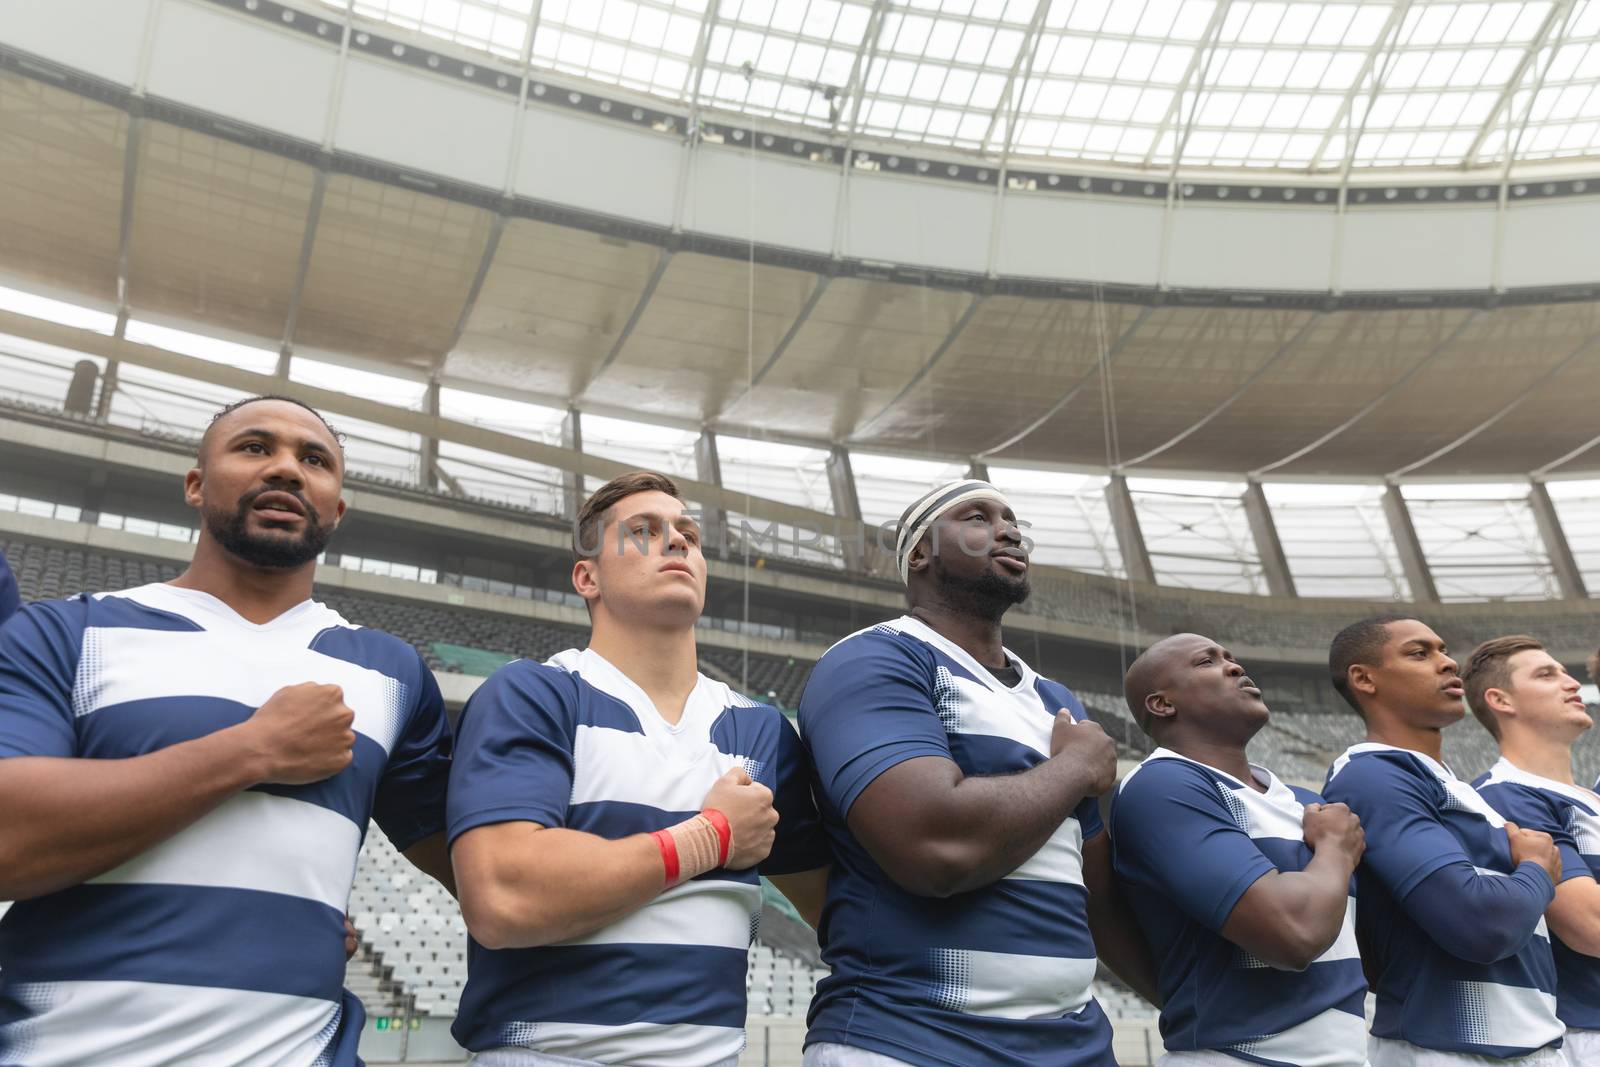 Group of diverse male rugby players taking pledge together in stadium by Wavebreakmedia